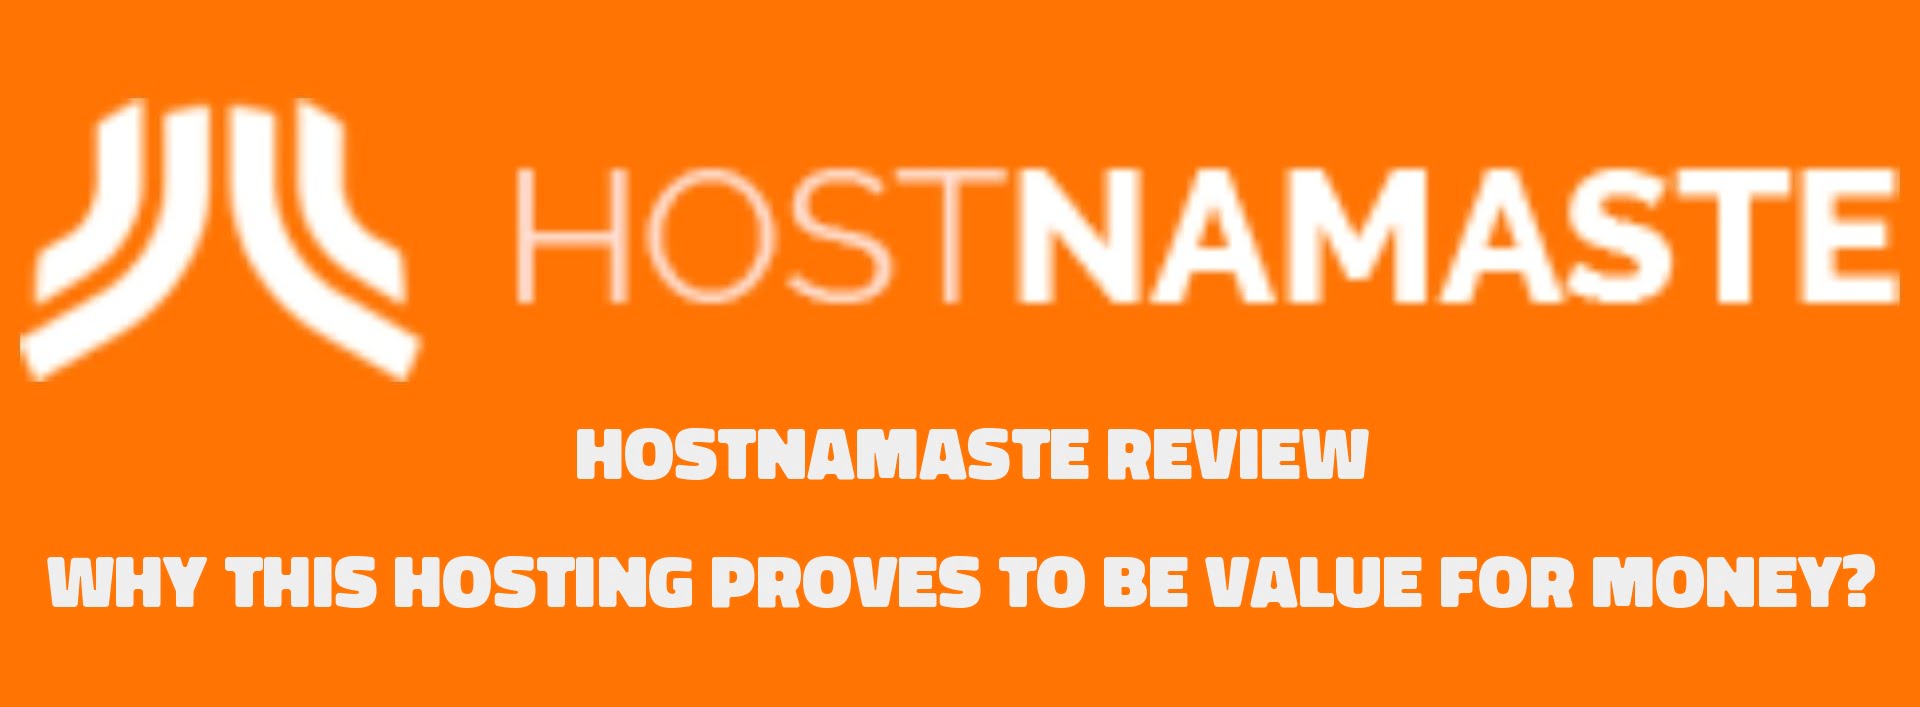 HostNamaste Review - Why this Hosting proves to be Value for Money